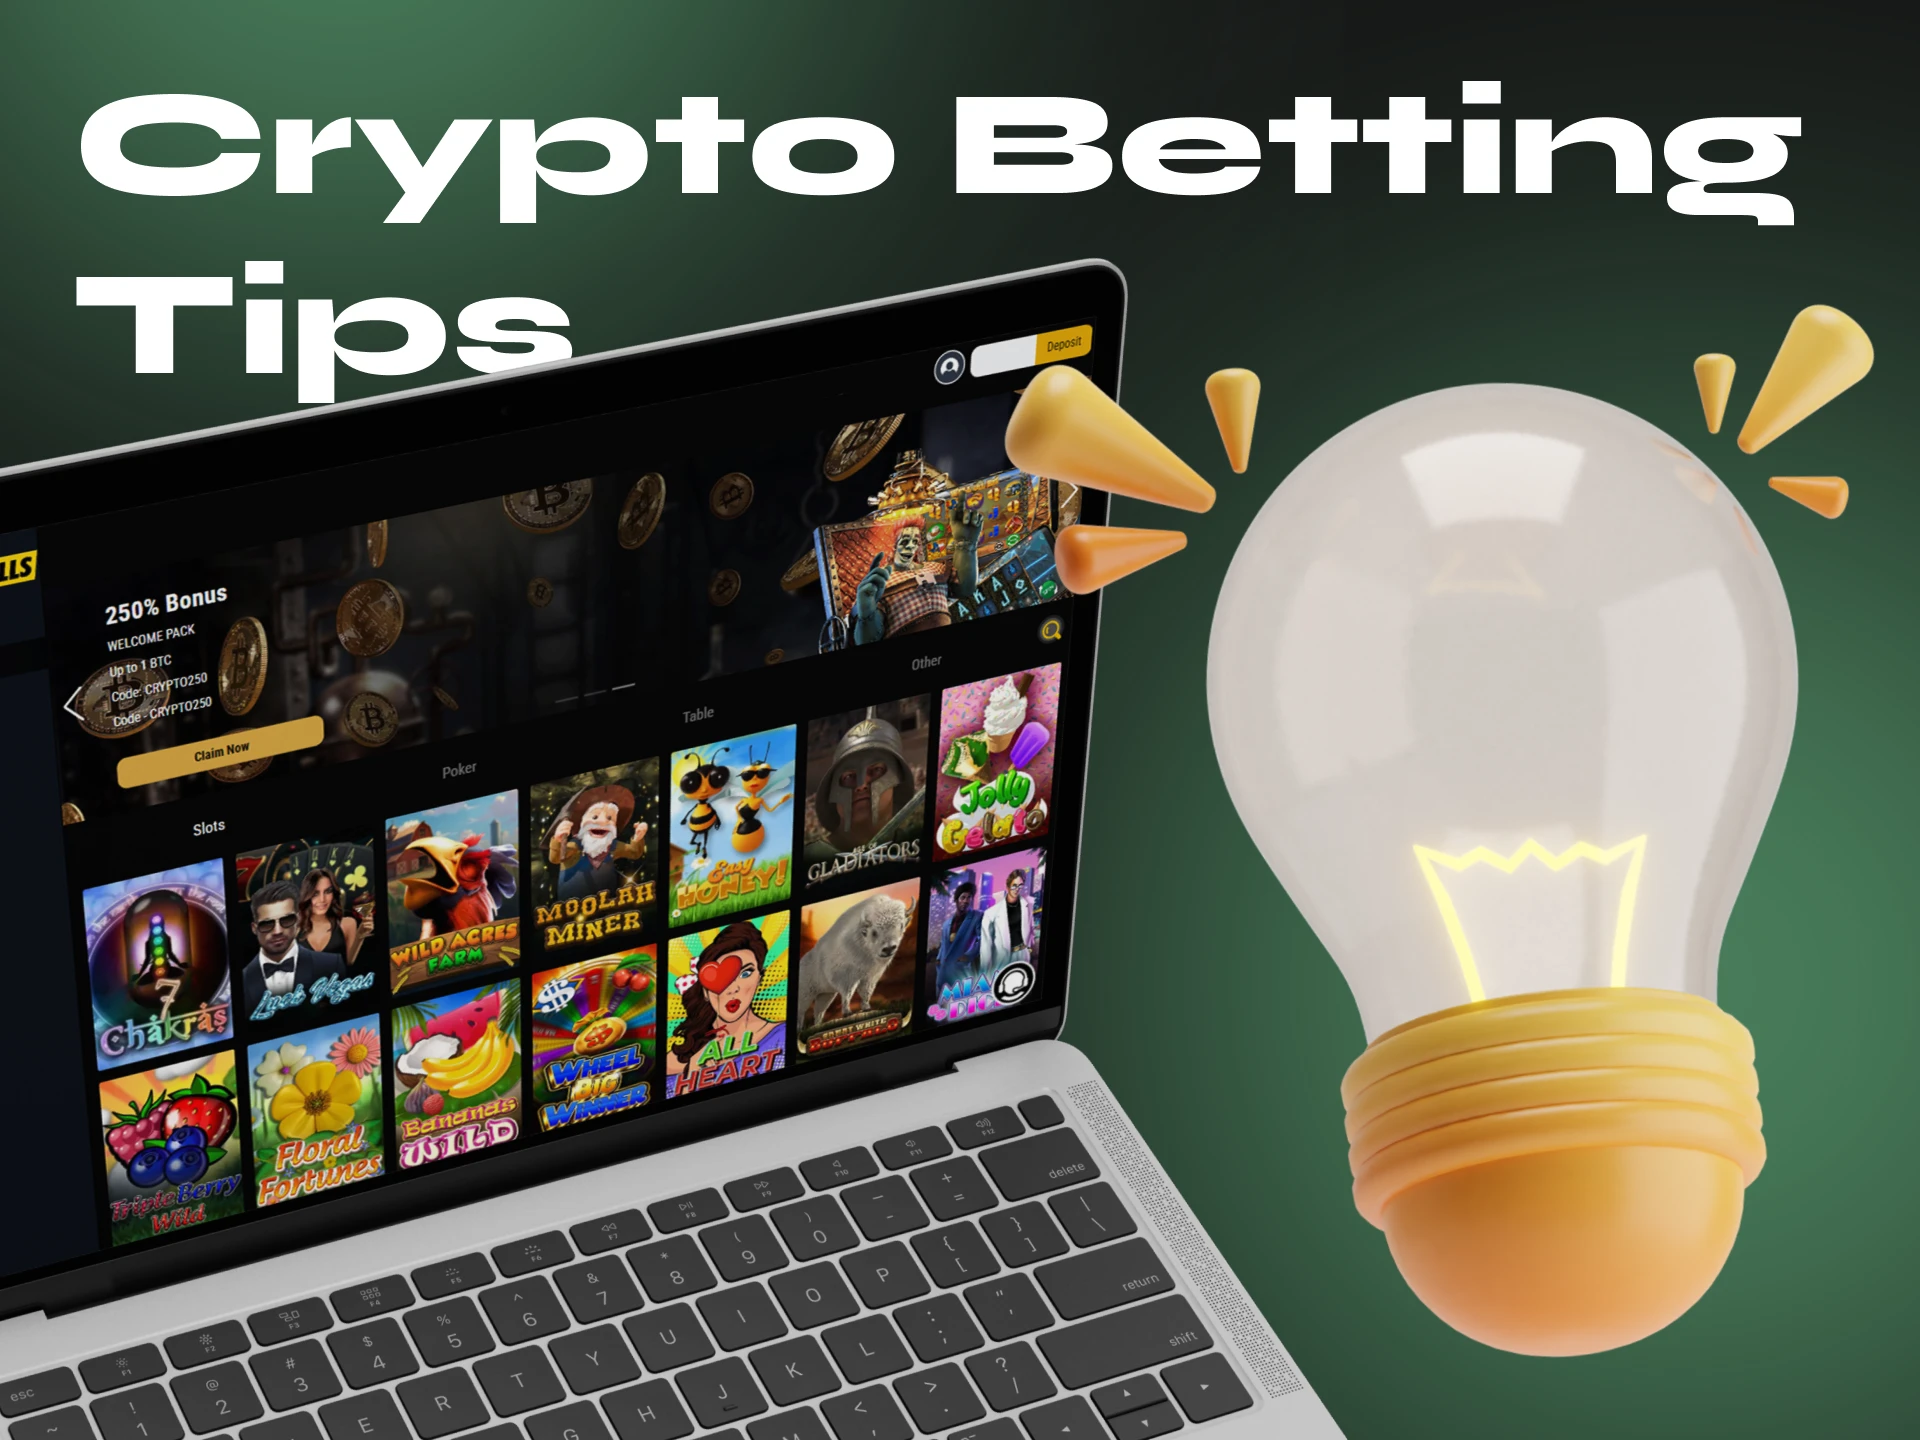 Increase your sports betting winnings with these tips.